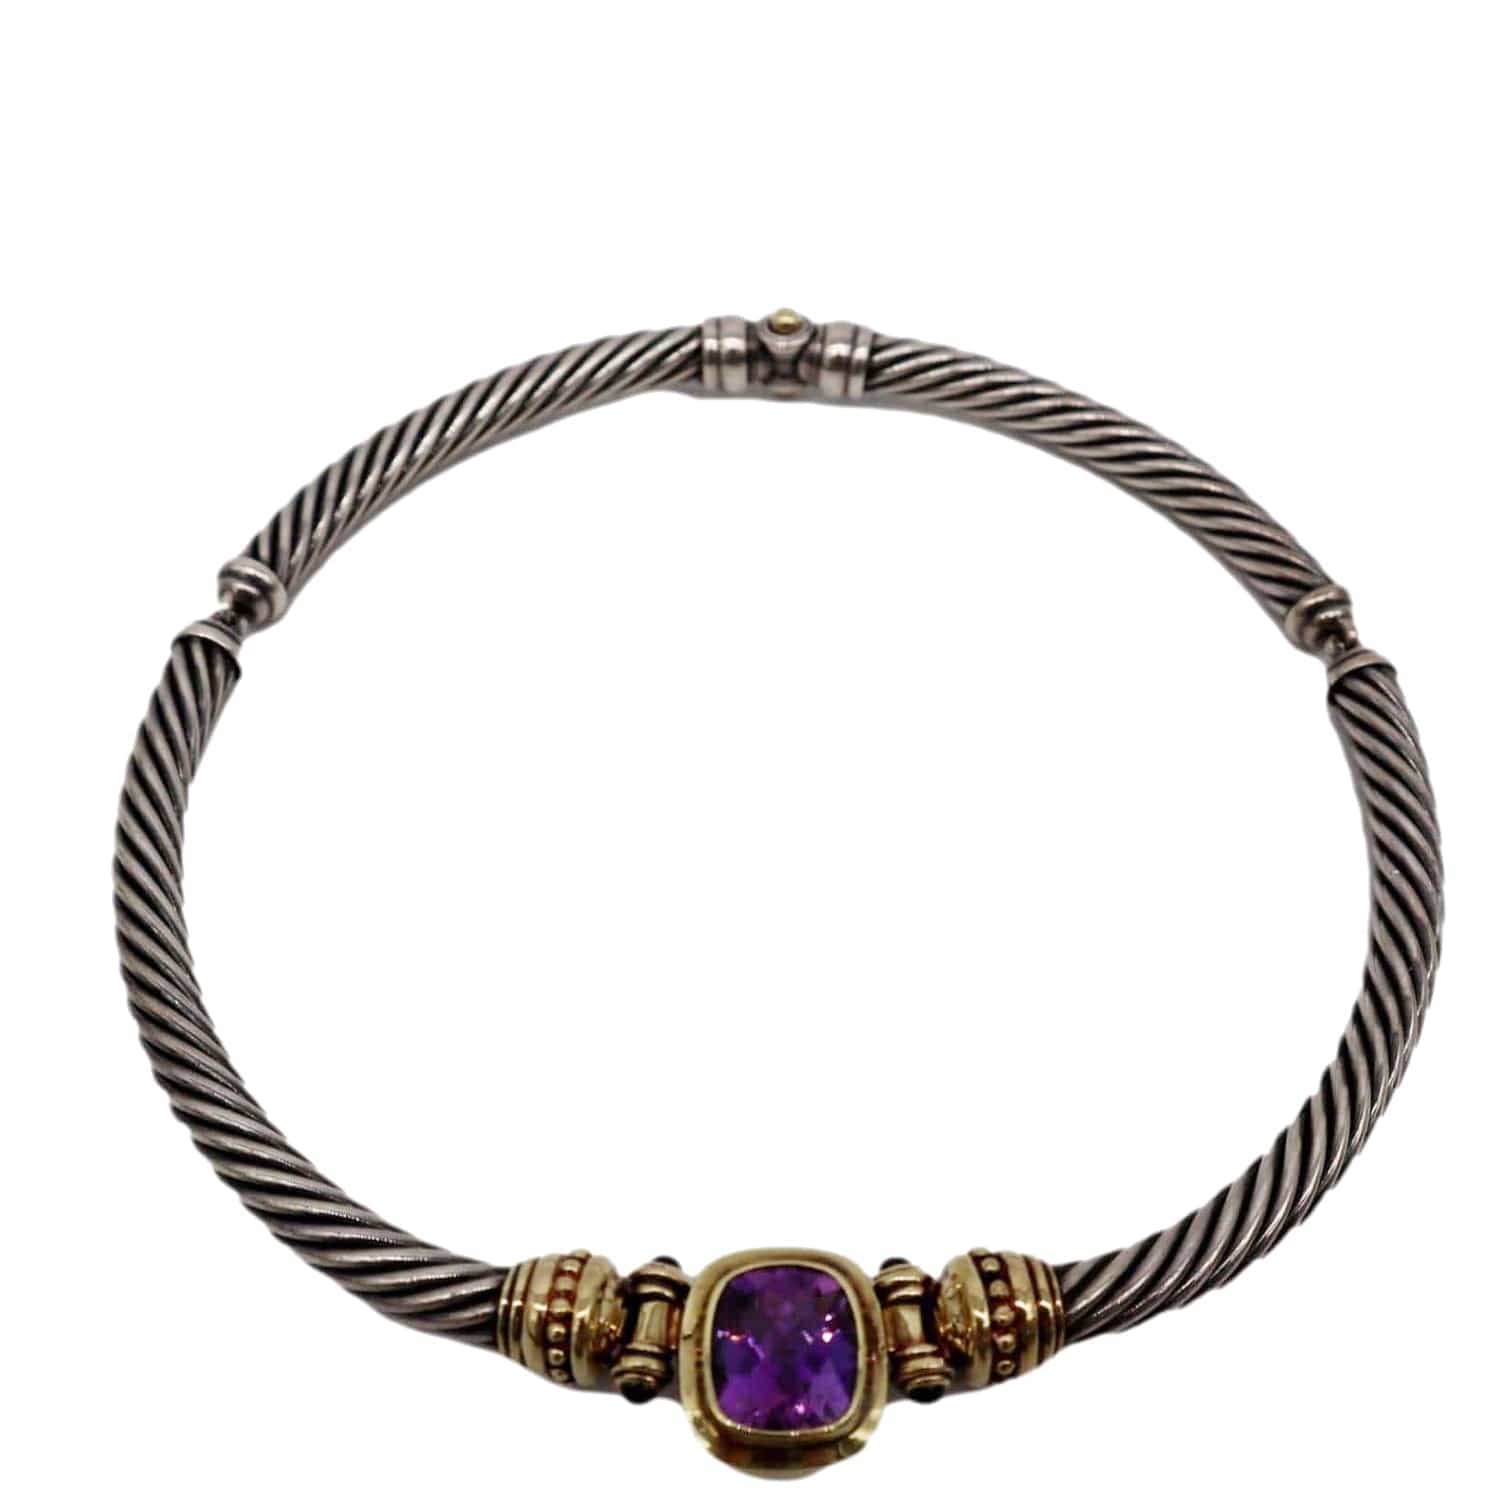 Lot - David Yurman sterling silver cable necklace with 14k gold clasp and  purple amethyst acorn enhancer pendant. 5 1/4